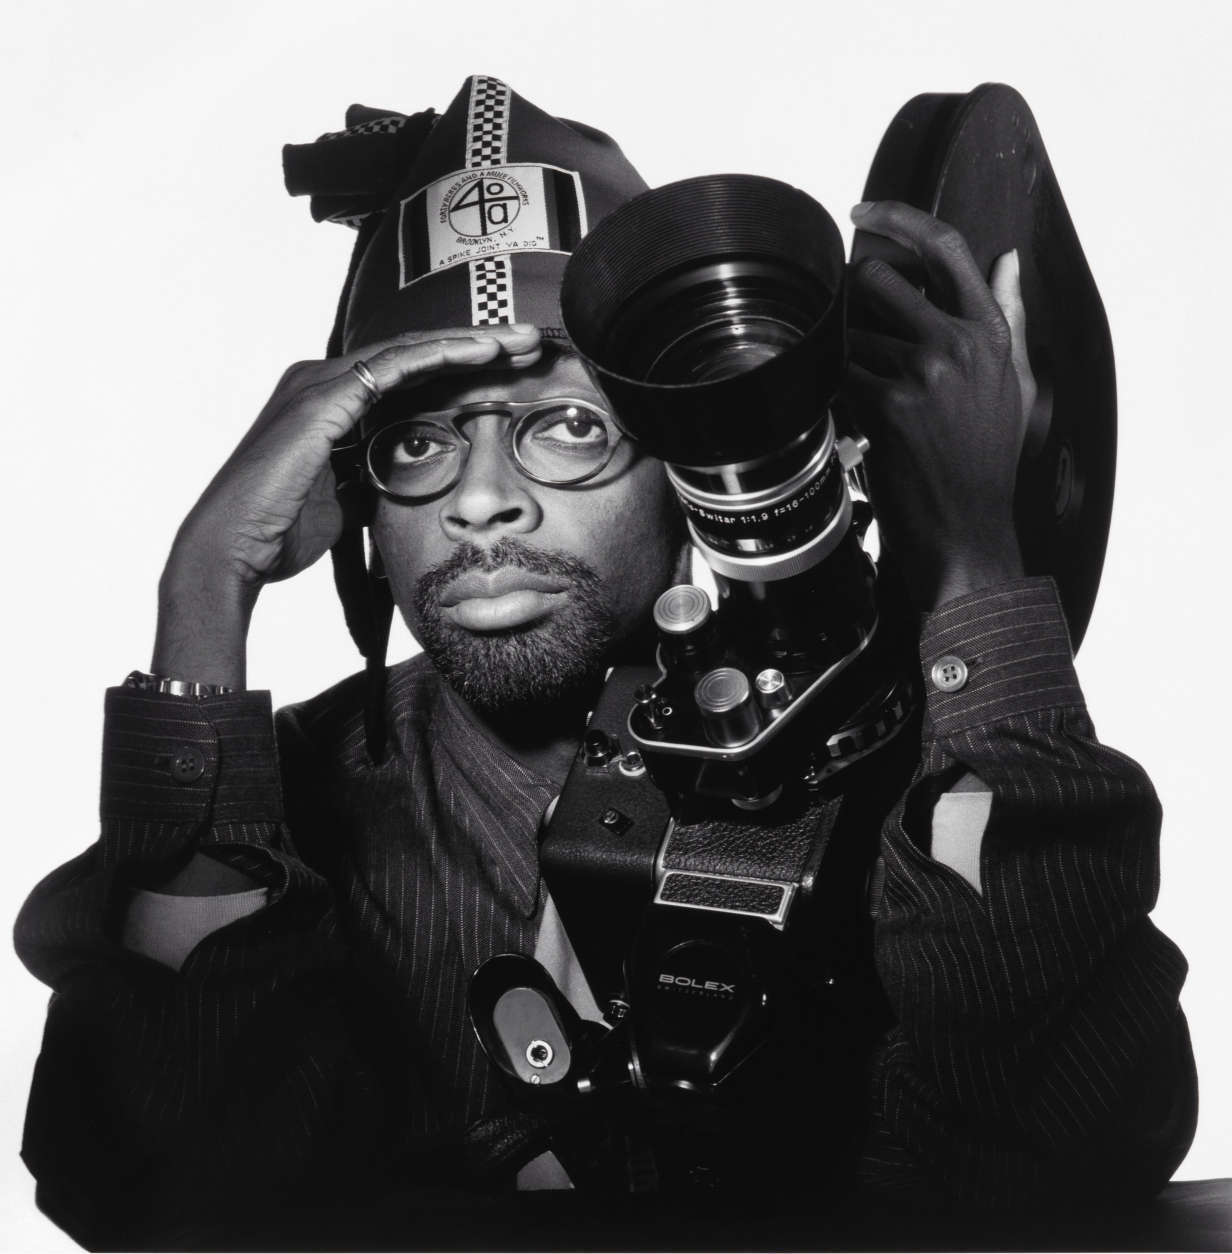 Jesse Frohman created this portrait of Spike Lee using injket print on paper in 1990. (Courtesy National Portrait Gallery)